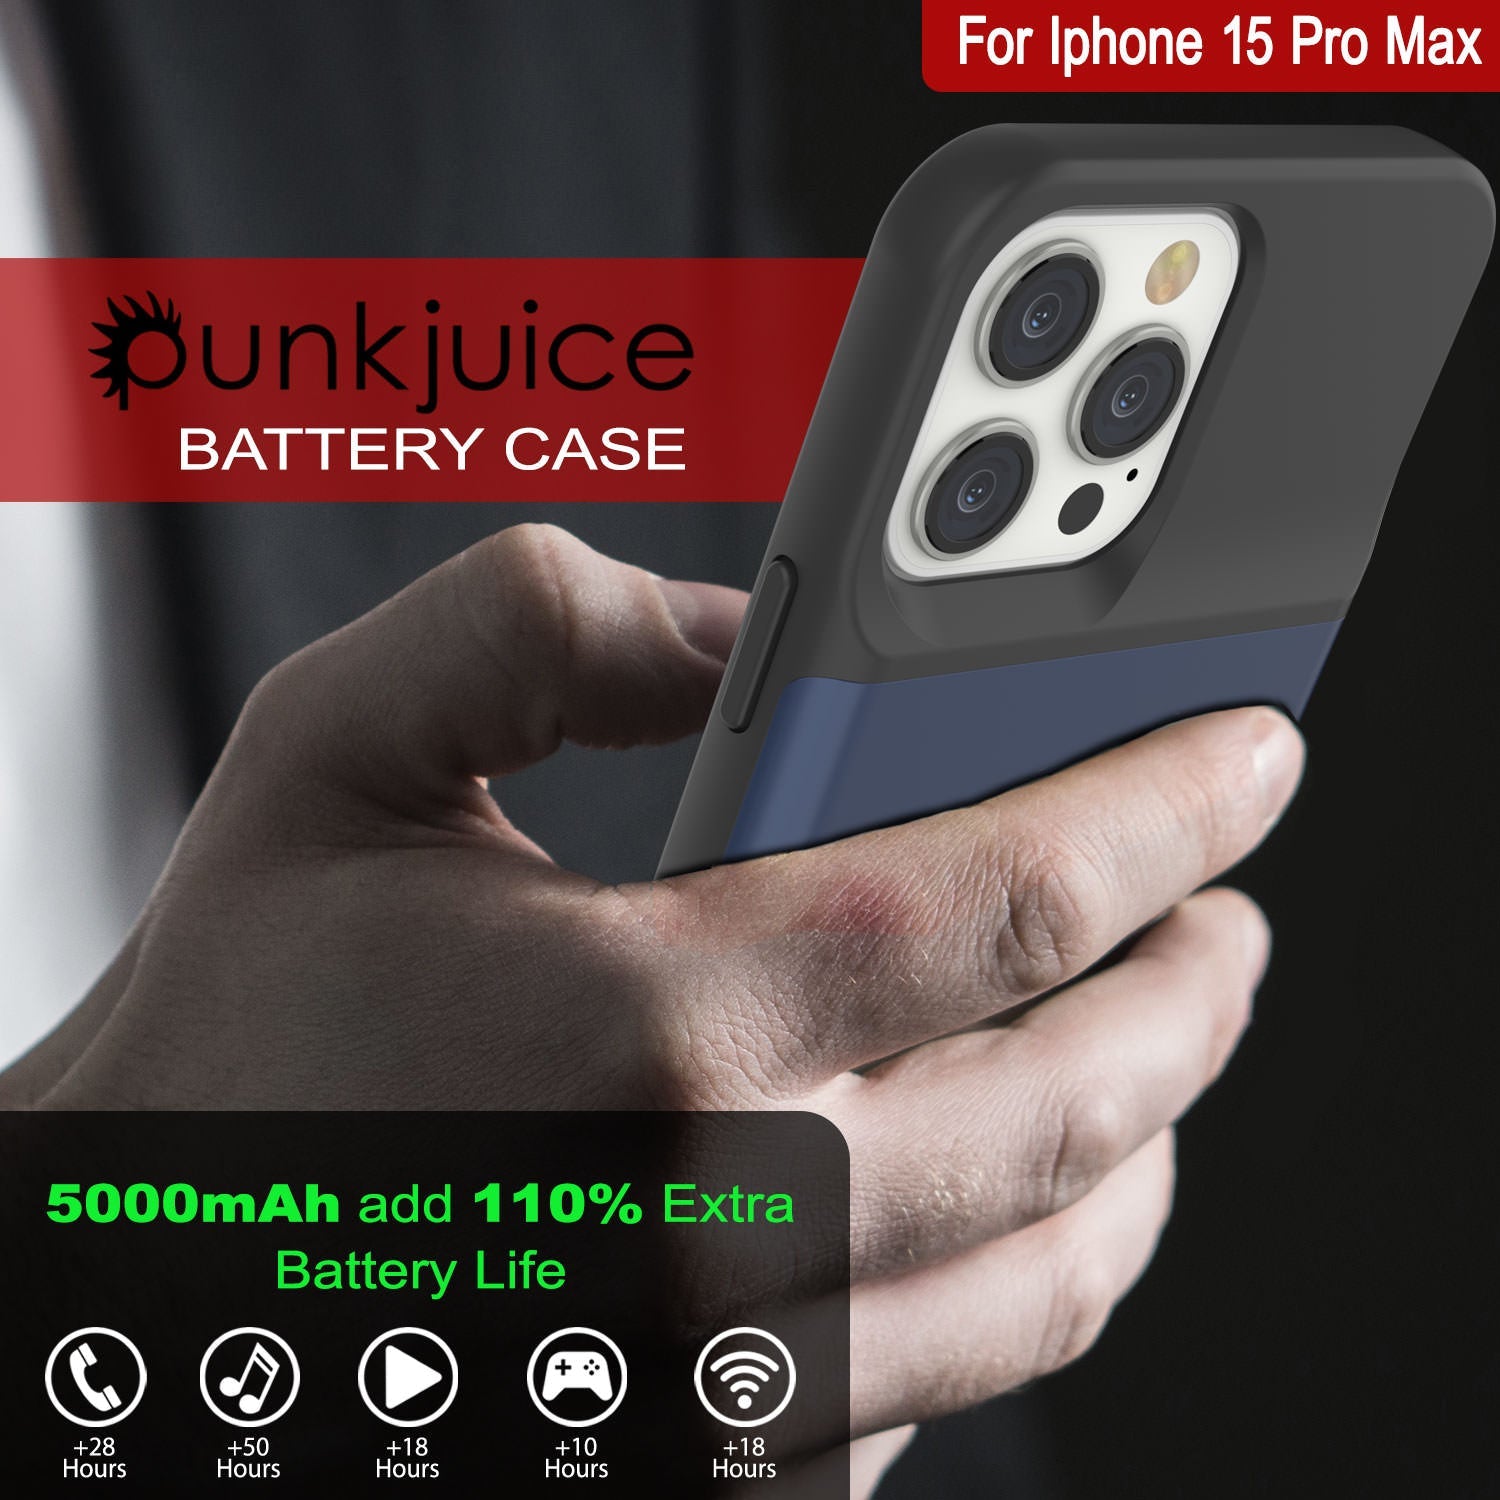 iPhone 15 Pro Max Battery Case, PunkJuice 5000mAH Fast Charging Power Bank W/ Screen Protector | [Navy Blue]